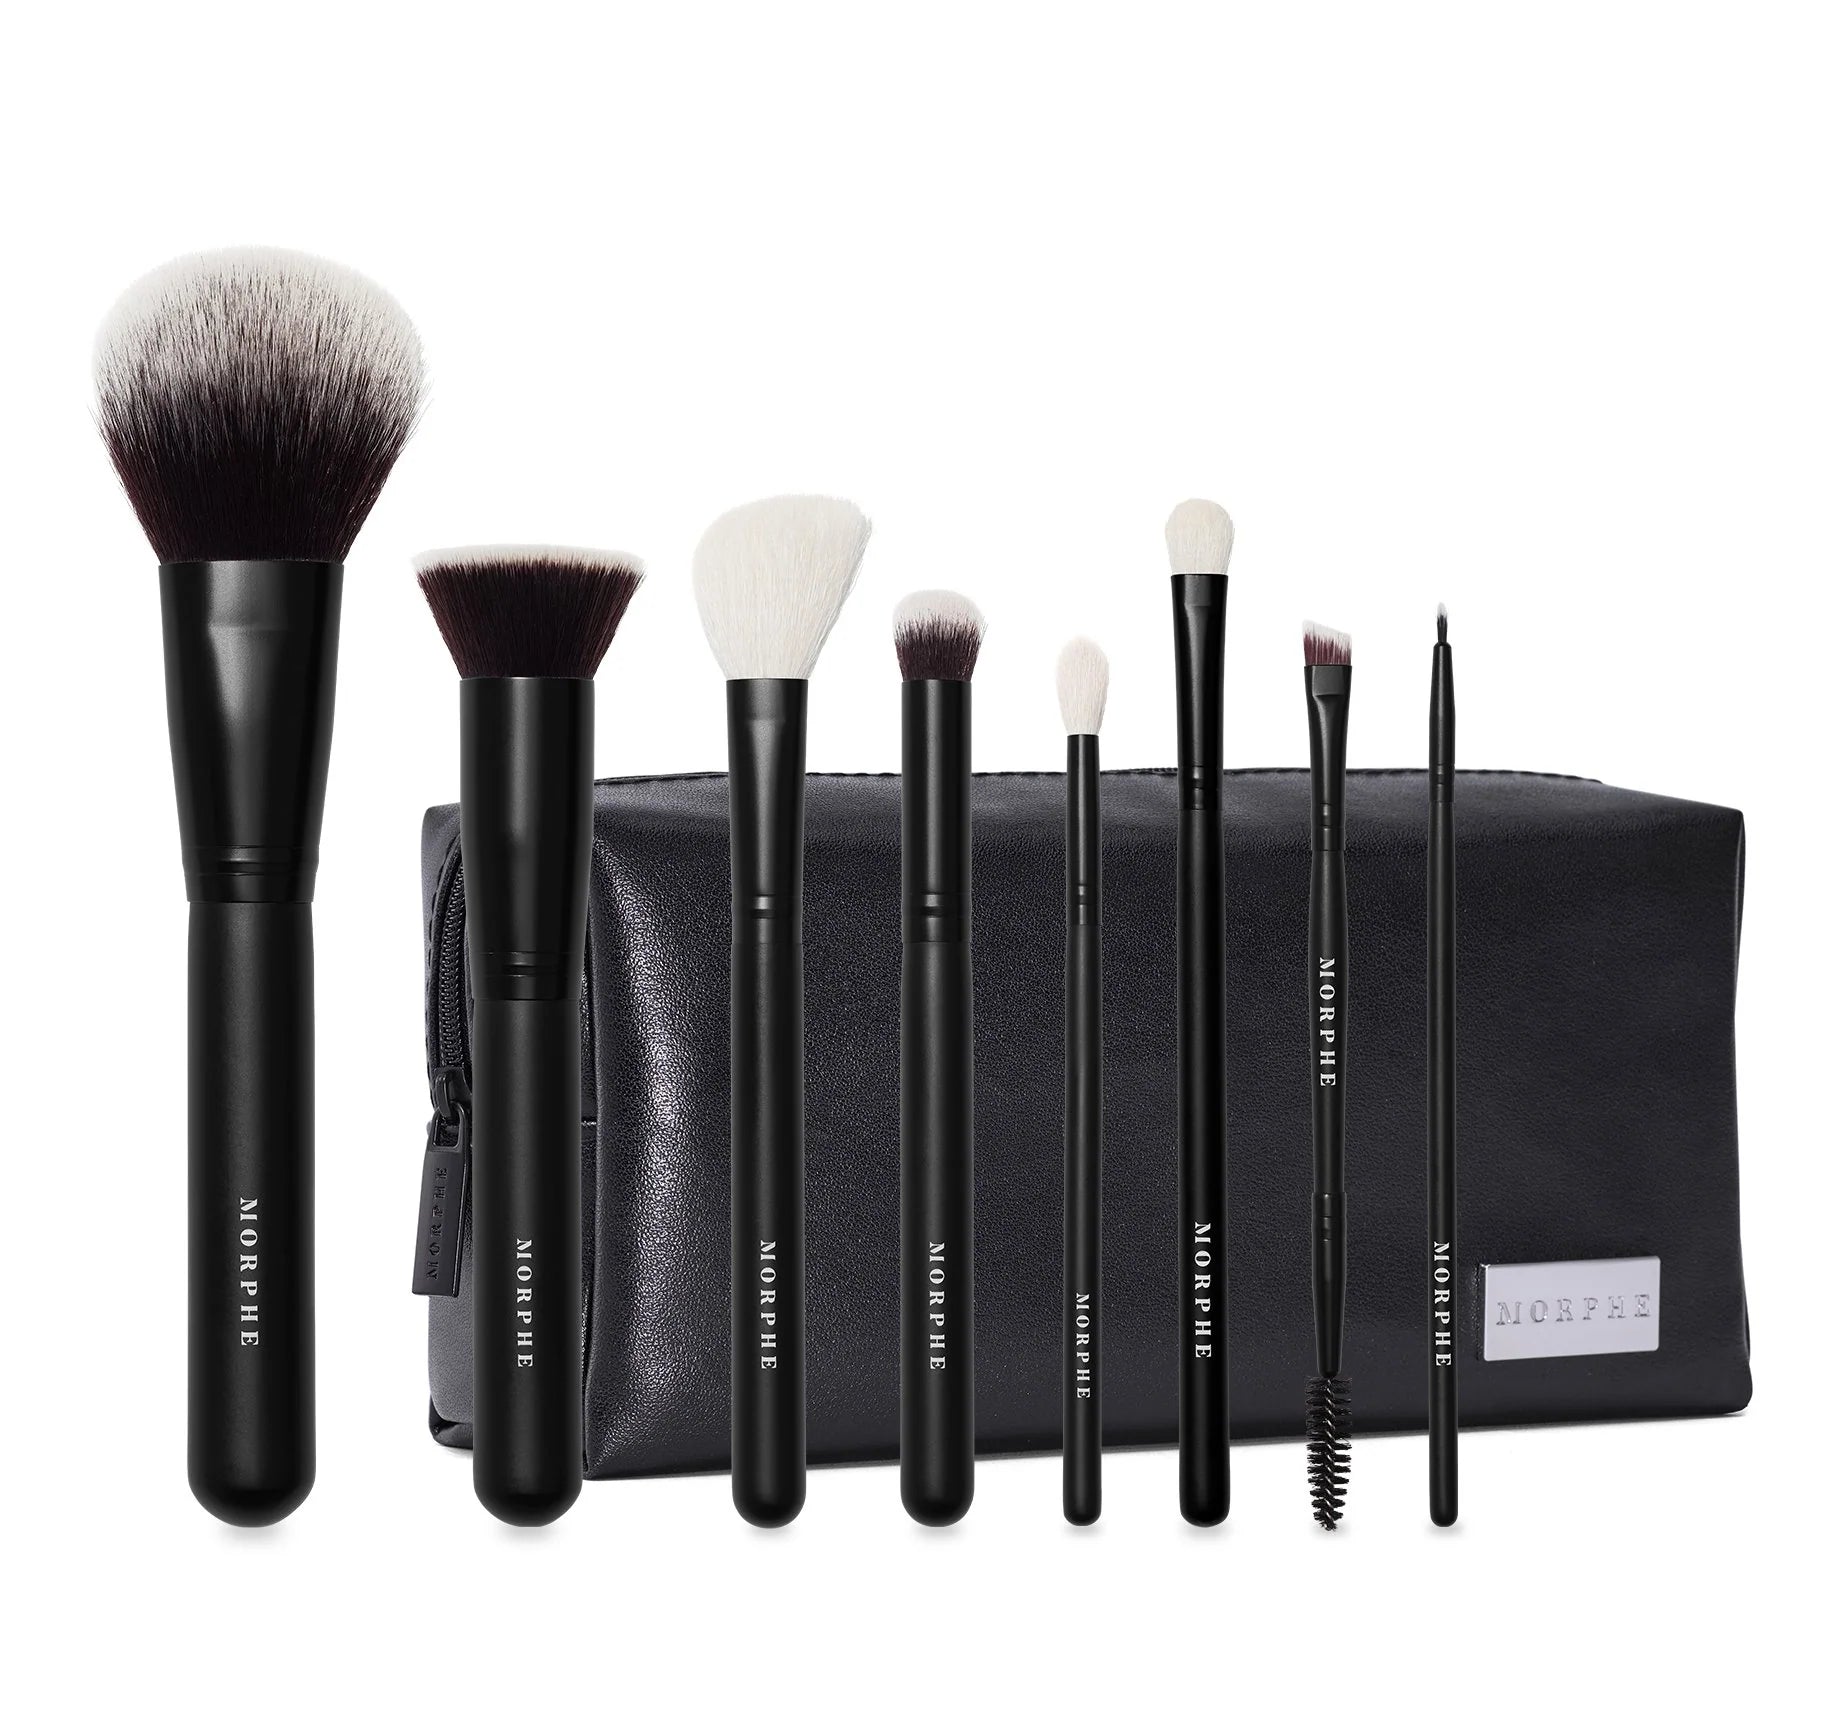 Morphe : Get Things Started 8 Piece Brush Set